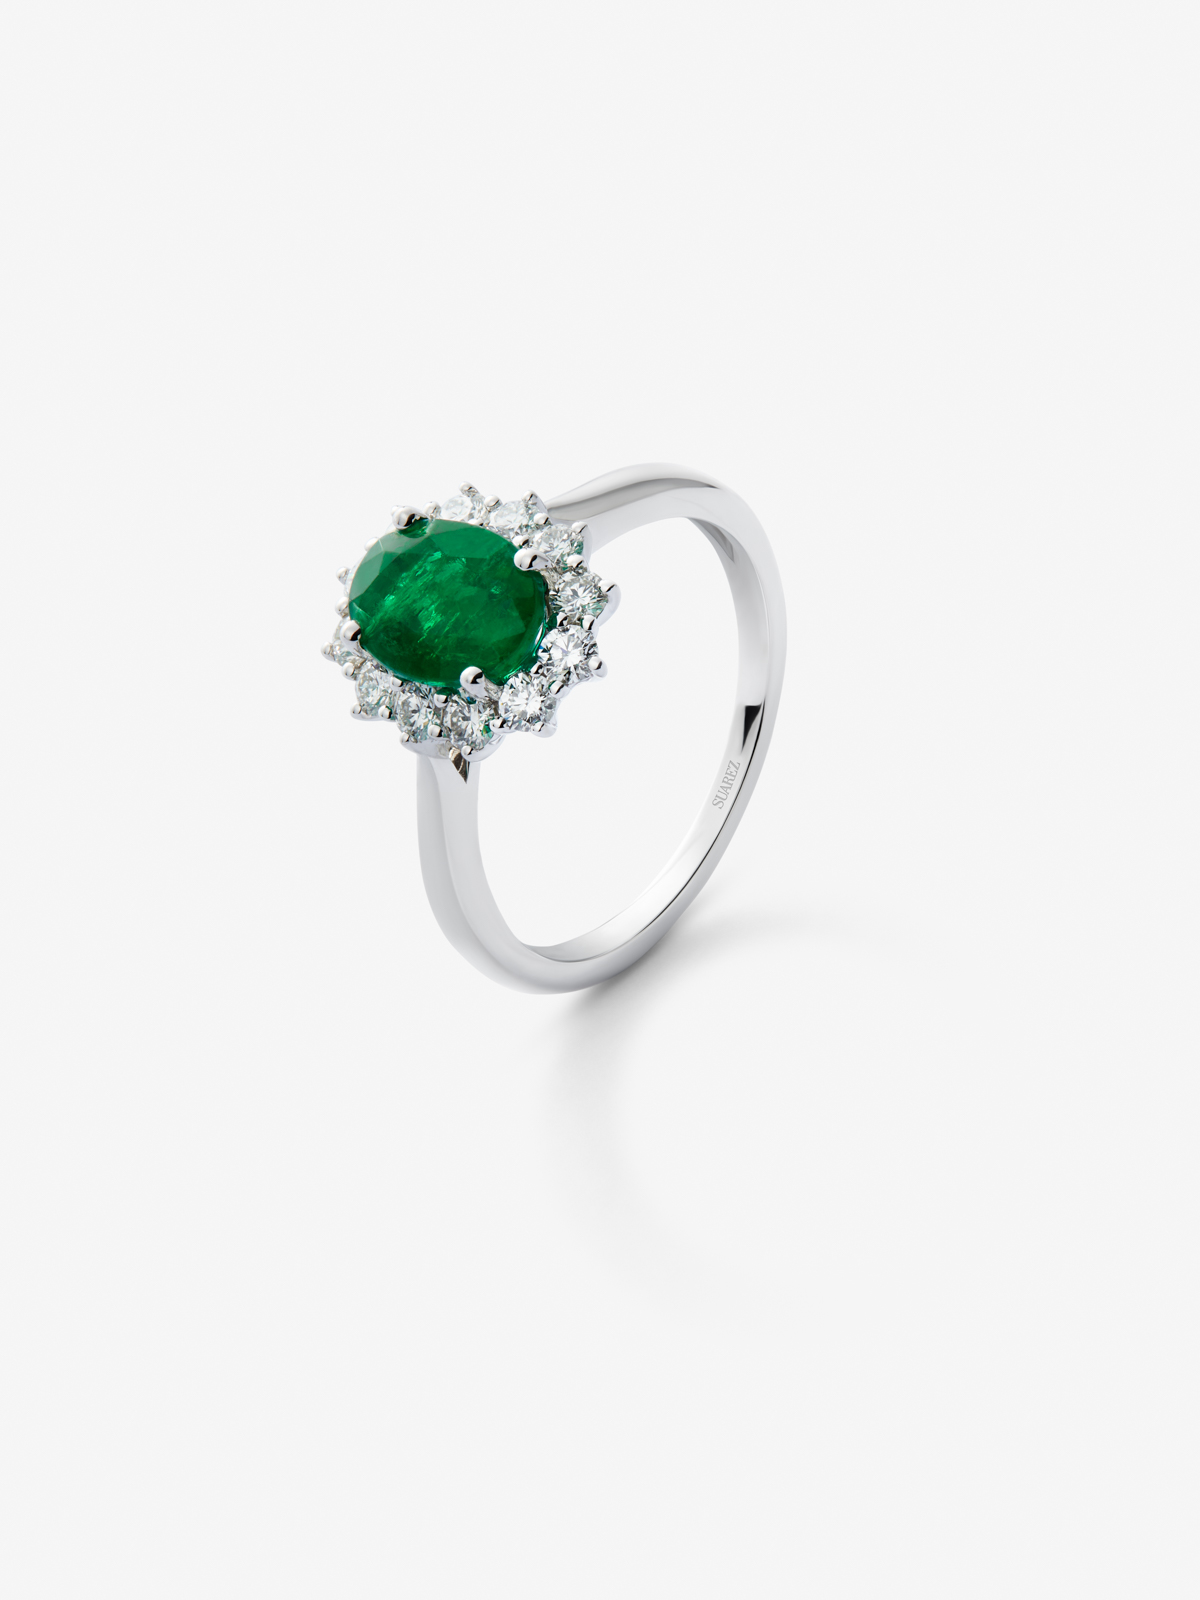 18K white gold ring with 0.77 ct oval-cut green emerald and 0.24 ct brilliant-cut diamonds